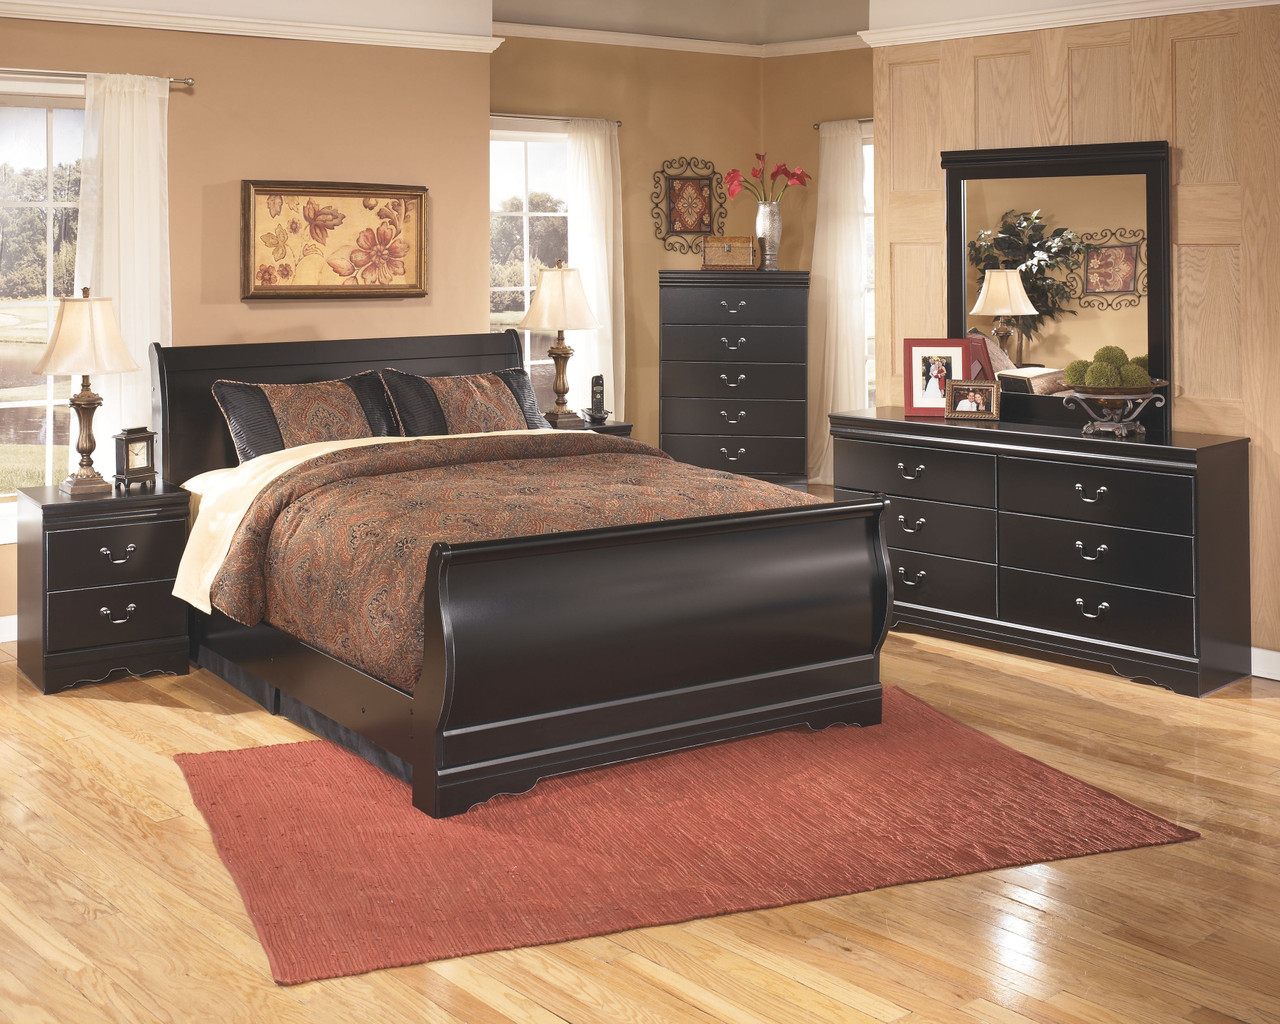 Louis Philip 5- Drawer Chest- Cherry Finish sold at Hilton Furniture  serving Houston, TX and surrounding areas.